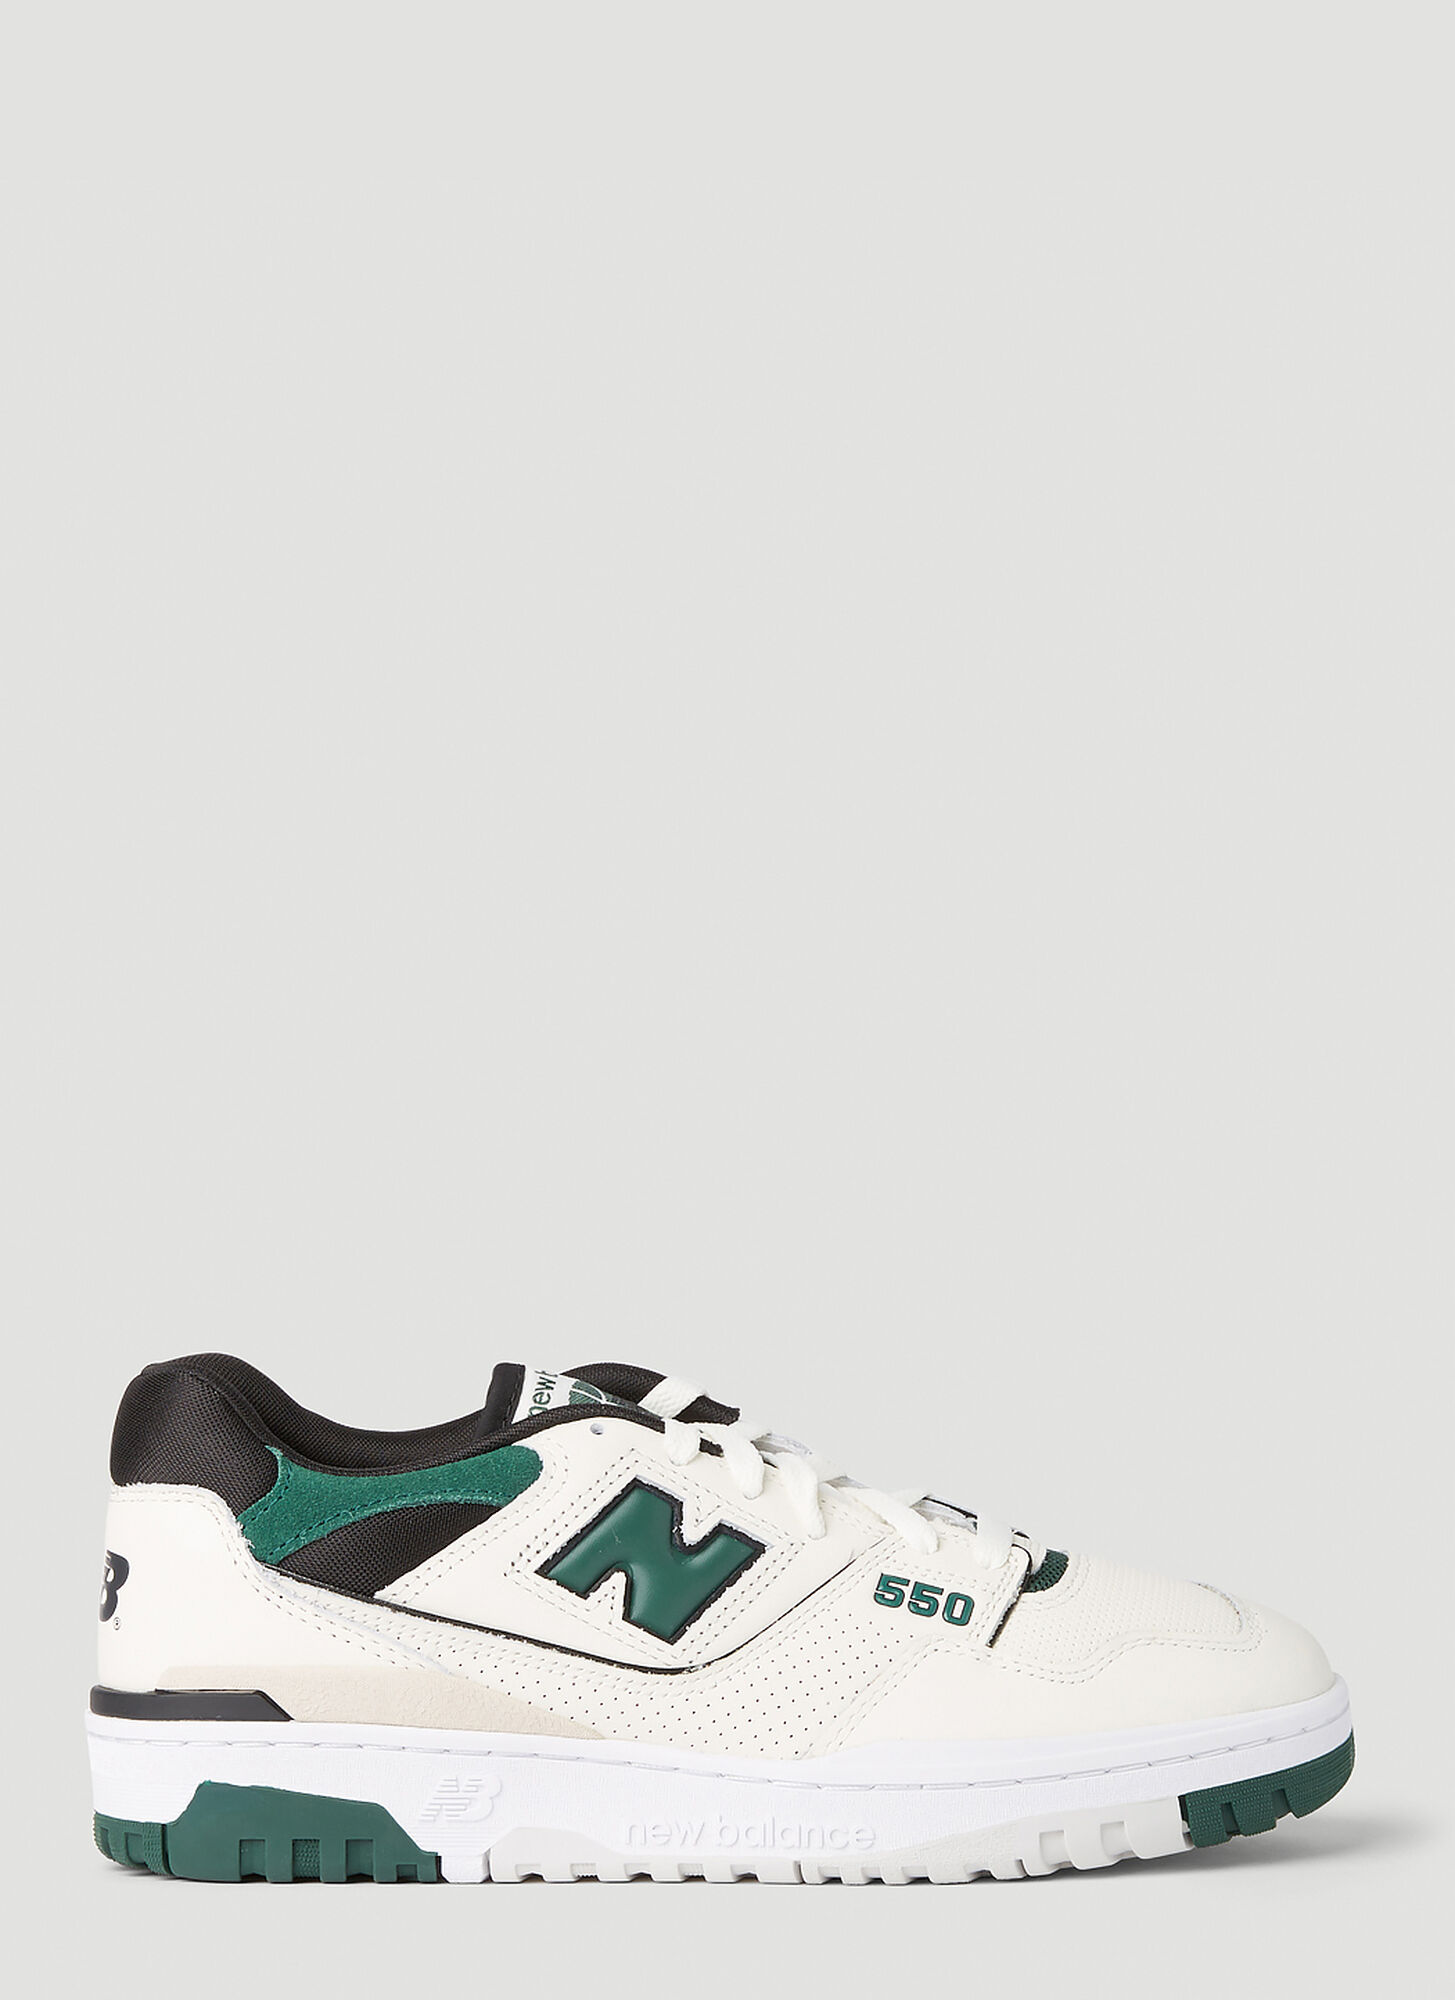 New Balance 550 Sneakers Unisex Green In White And Green